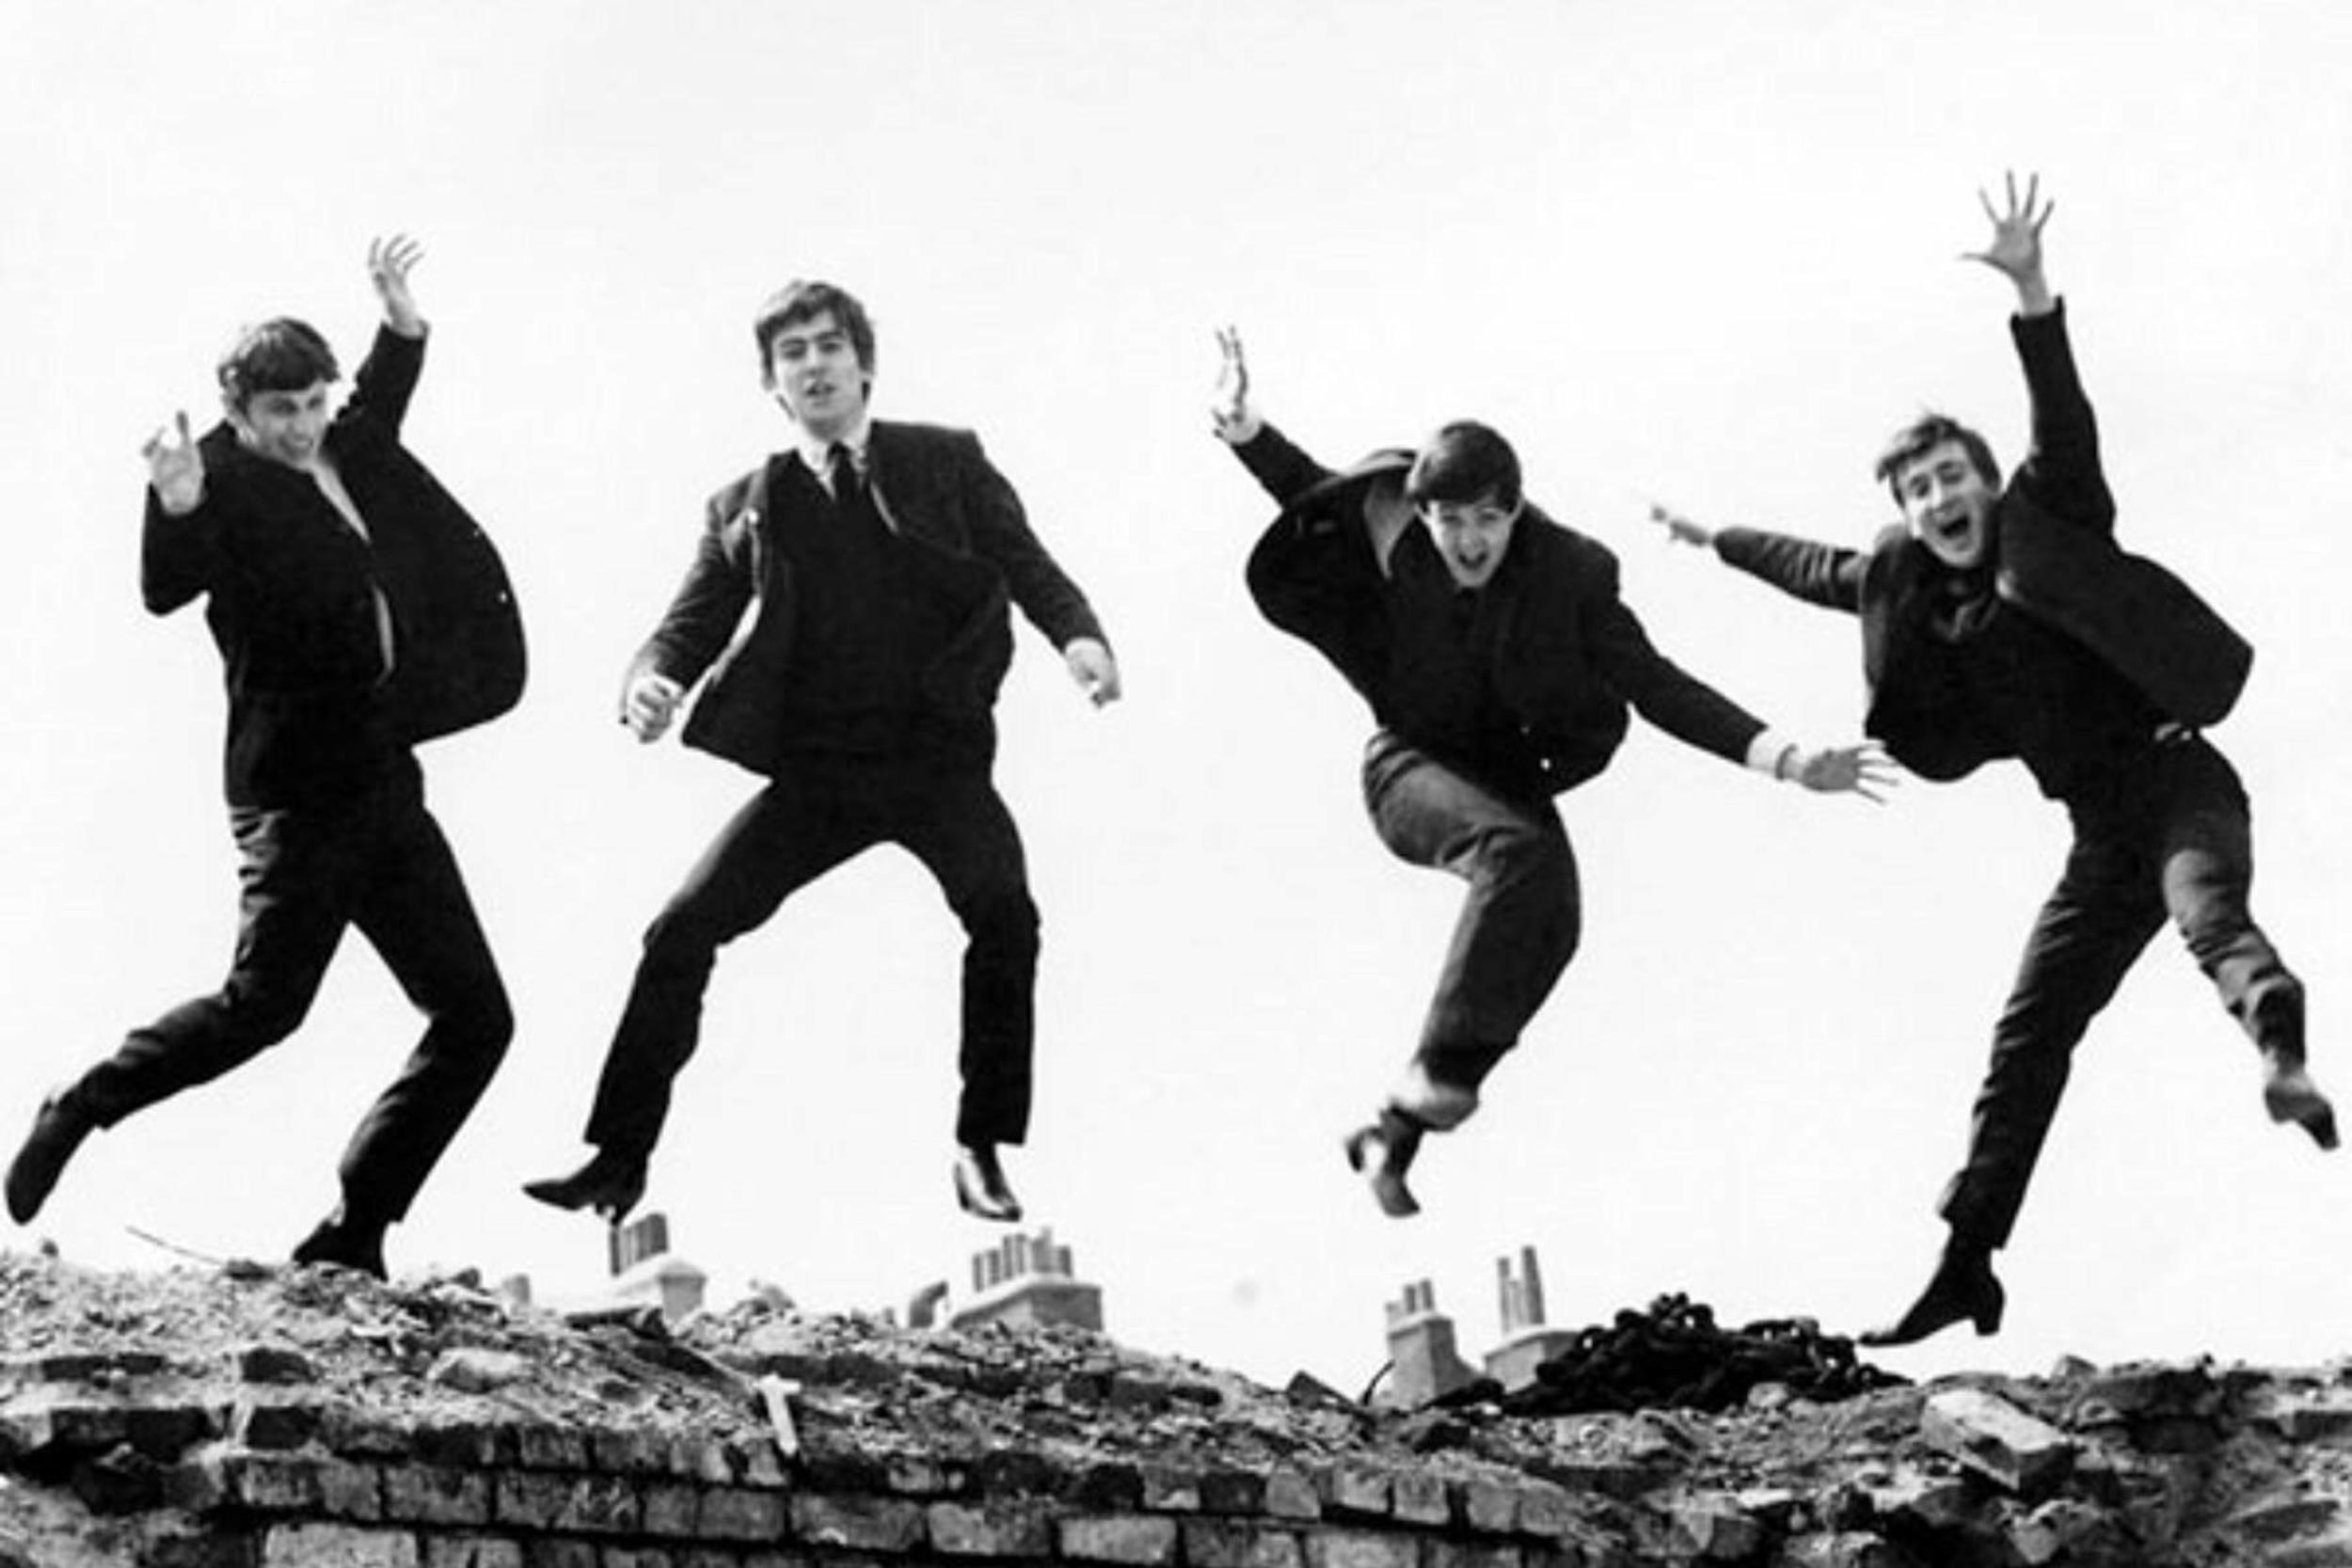 <p>The exuberant standout track from “A Hard Day’s Night” is all McCartney, though the most crucial decision in the songwriting — kicking off with the chorus — was George Martin’s idea. Director Richard Lester designed the film’s centerpiece around the single, which many consider a hugely influential piece of music video filmmaking. The jazzy energy of the song also appealed to Ella Fitzgerald, who recorded a cover version in 1964. </p><p>You may also like: <a href='https://www.yardbarker.com/entertainment/articles/20_facts_you_might_not_know_about_die_hard/s1__26772467'>20 facts you might not know about 'Die Hard'</a></p>